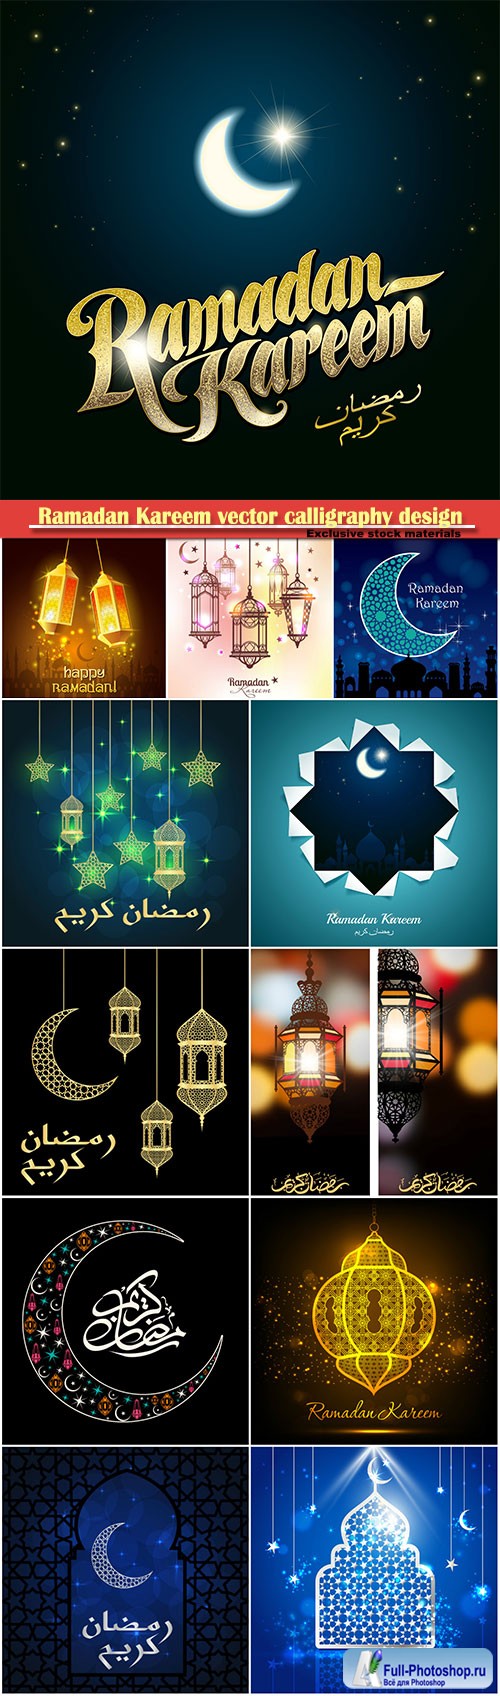 Ramadan Kareem vector calligraphy design with decorative floral pattern, mosque silhouette, crescent and glittering islamic background # 27